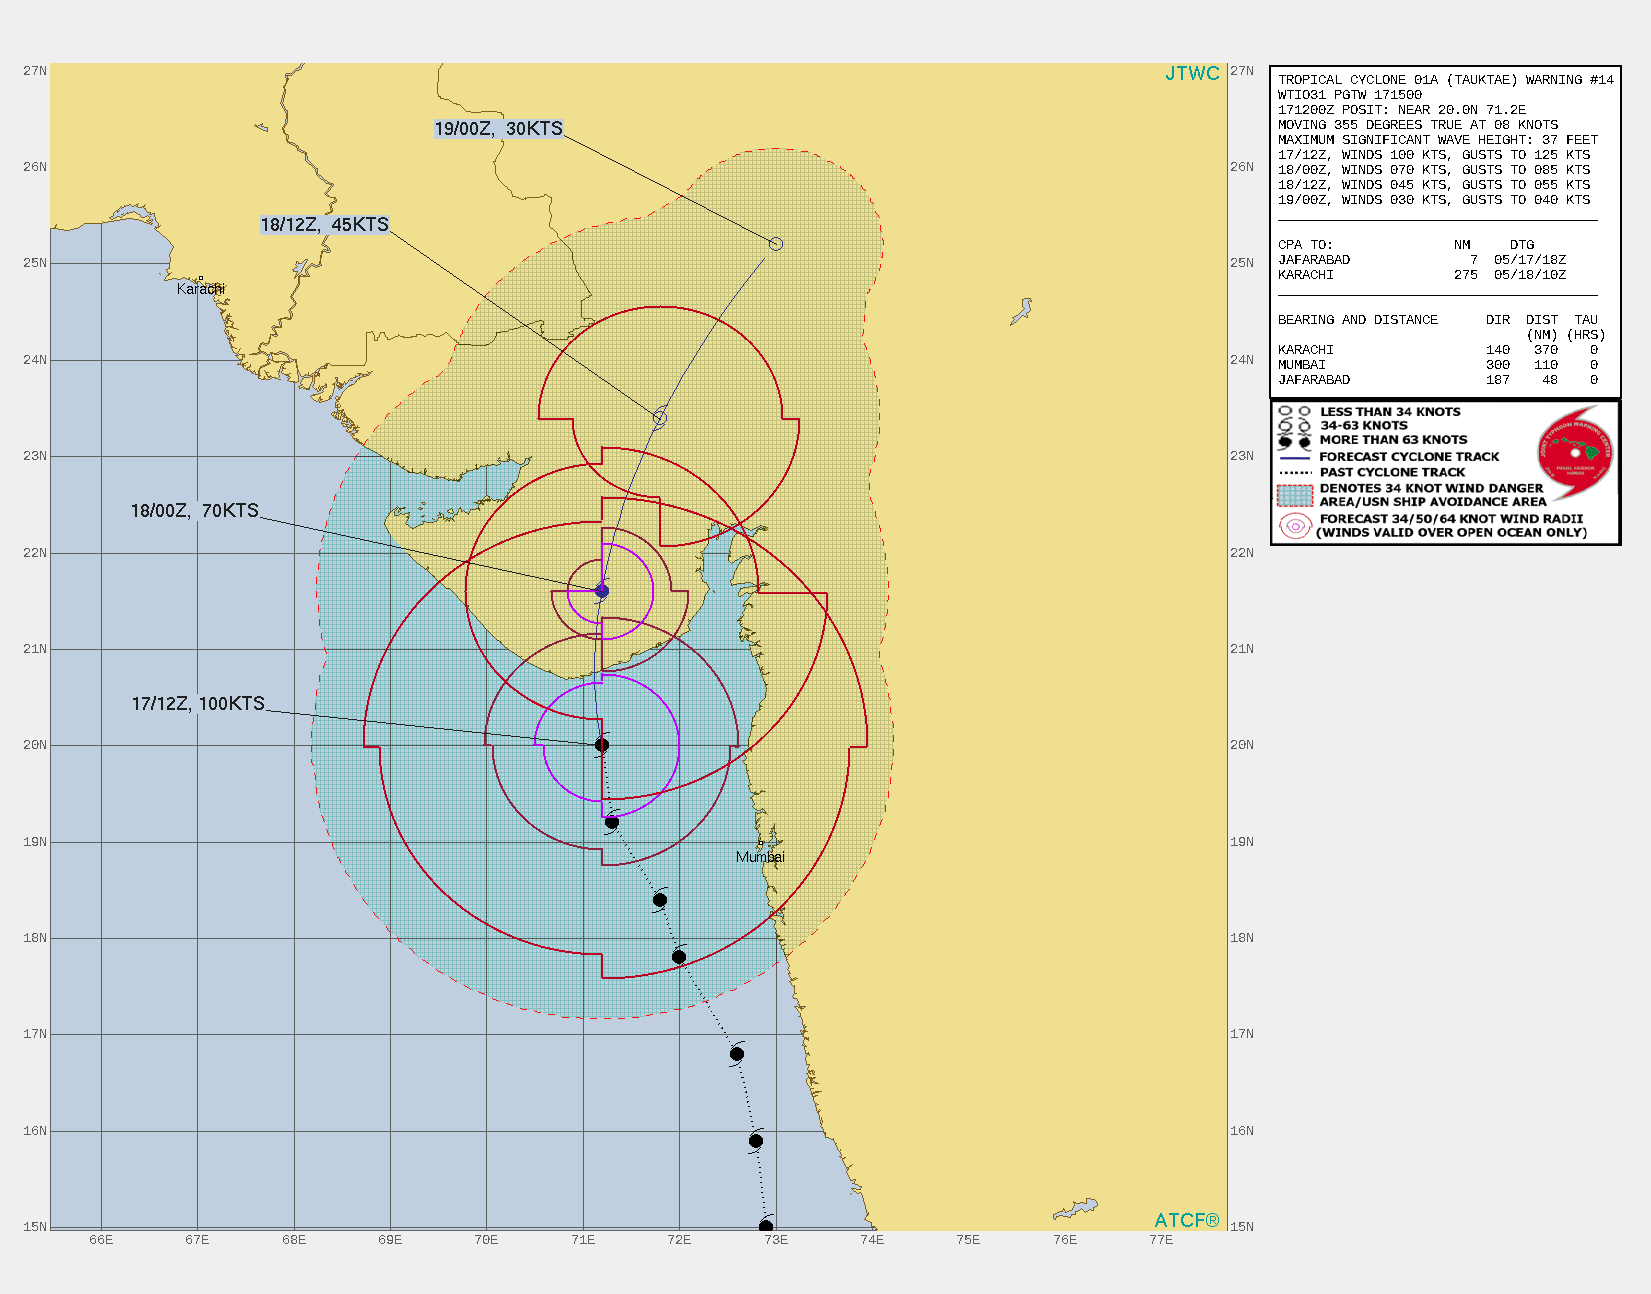 TC 01A(TAUKTAE). WARNING 14 ISSUED AT 17/15UTC. ANALYSIS INDICATES FAVORABLE ENVIRONMENTAL CONDITIONS  WITH STRONG POLEWARD OUTFLOW, MODERATE (15-20KTS) VERTICAL WIND  SHEAR (VWS), AND WARM (28-29C) SEA SURFACE TEMPERATURE (SST). TC 01A  WILL BEGIN TURNING TO THE NORTHEAST OVER THE NEXT 12 HOURS AS IT  TRACKS ALONG THE NORTHWESTERN PERIPHERY OF A DEEP-LAYERED  SUBTROPICAL RIDGE TO THE EAST-SOUTHEAST UNTIL IT MAKES LANDFALL NEAR  JAFARABAD, INDIA THROUGH 12H. THE SYSTEM IS EXPECTED TO DECREASE  IN INTENSITY AS IT ENTERS AN AREA OF GREATER VWS IN CONJUNCTION WITH  TERRAIN INTERACTION AND SLIGHTLY COOLER SSTS NEARSHORE AS IT TRACKS  NORTH. AFTER LANDFALL, THE CYCLONE WILL RAPIDLY ERODE AS IT TRACKS  ACROSS THE RUGGED TERRAIN AND THE HIGHER VWS, LEADING TO THE OVERALL  DISSIPATION BY 36H.